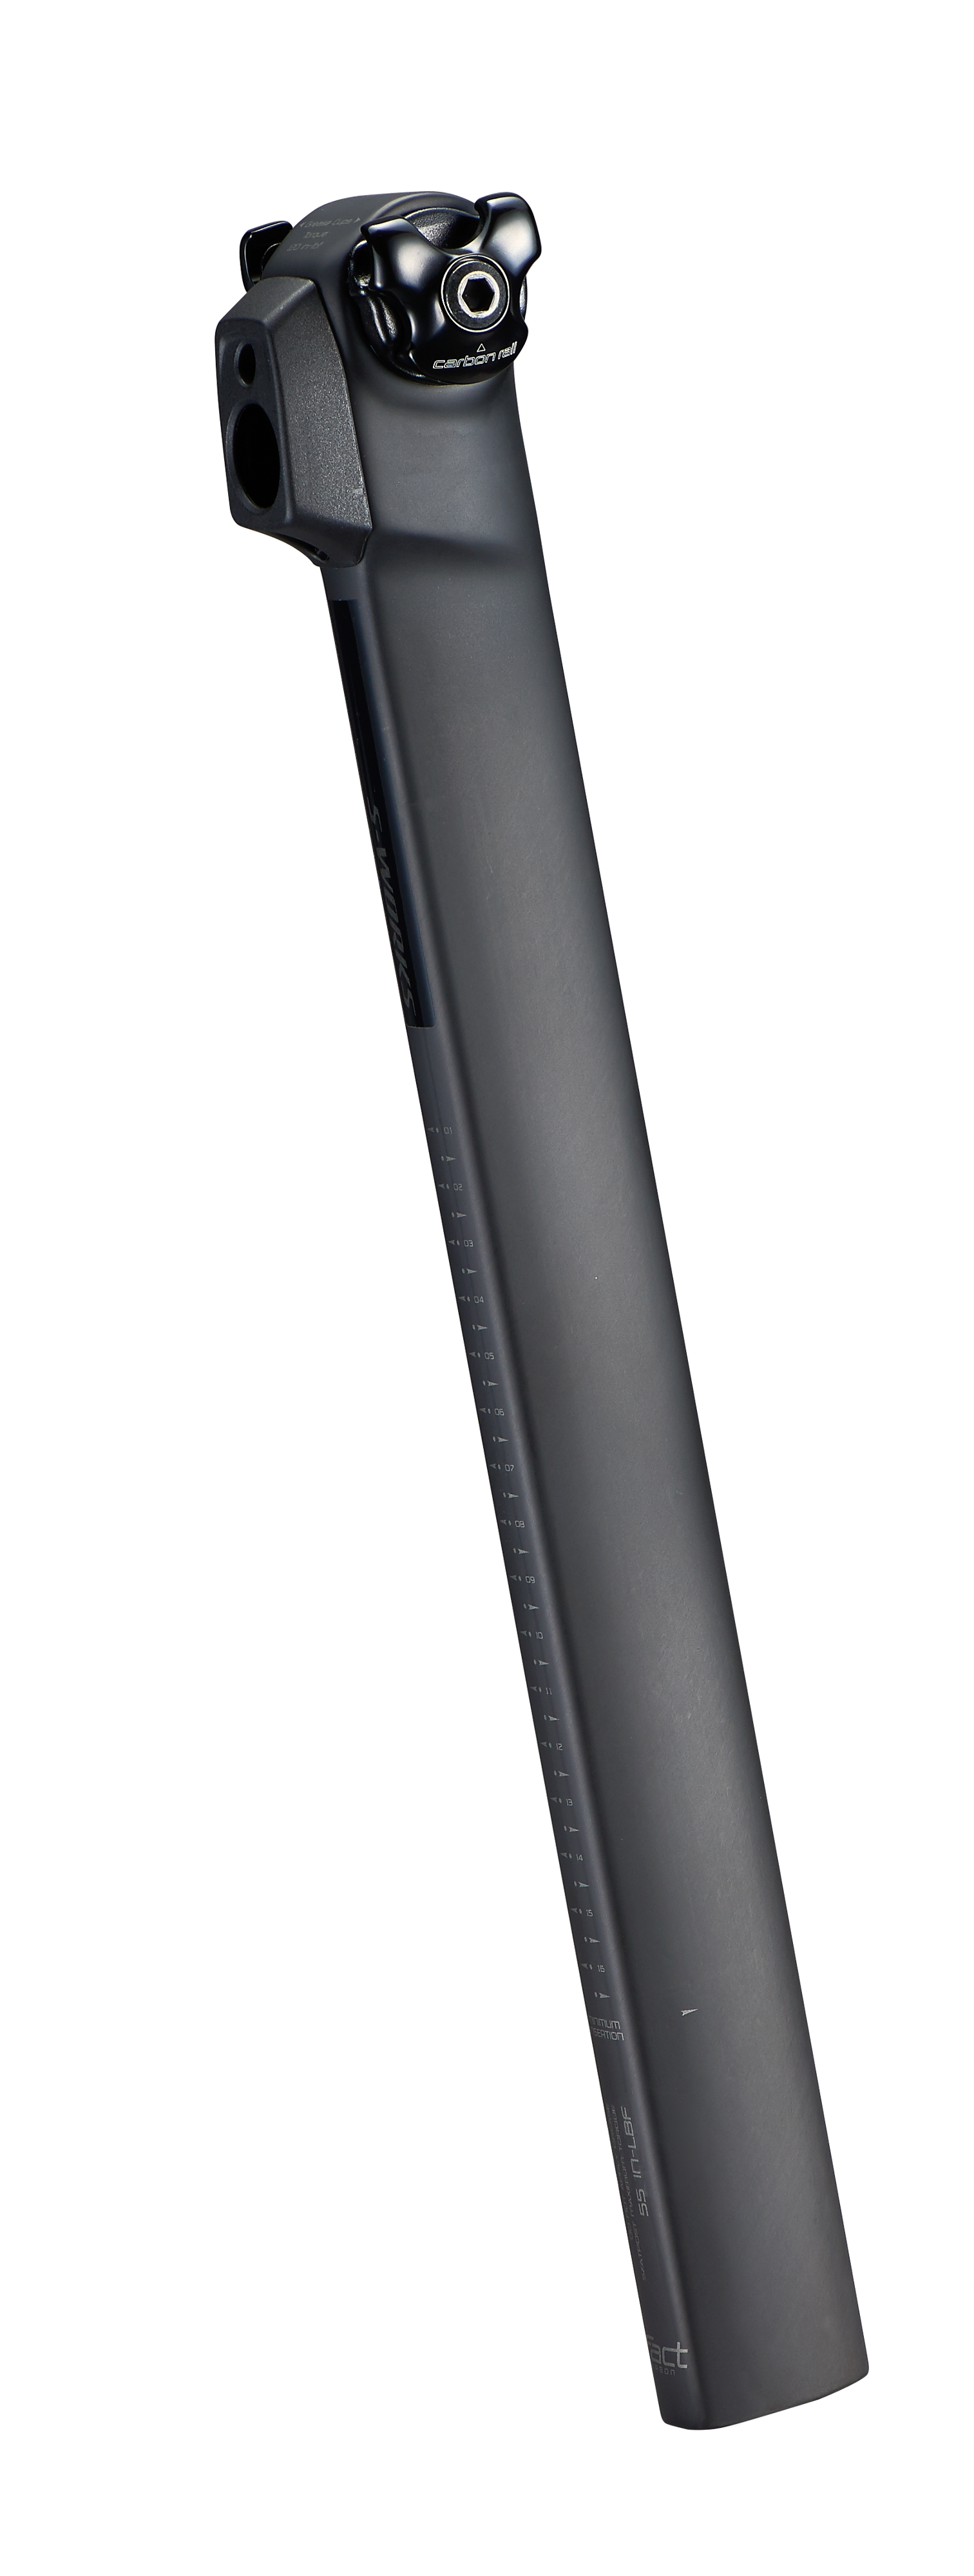 S-WORKS TARMAC CARBON POST 300MM 0 OFFSET(300mm X 0mm OFFSET 